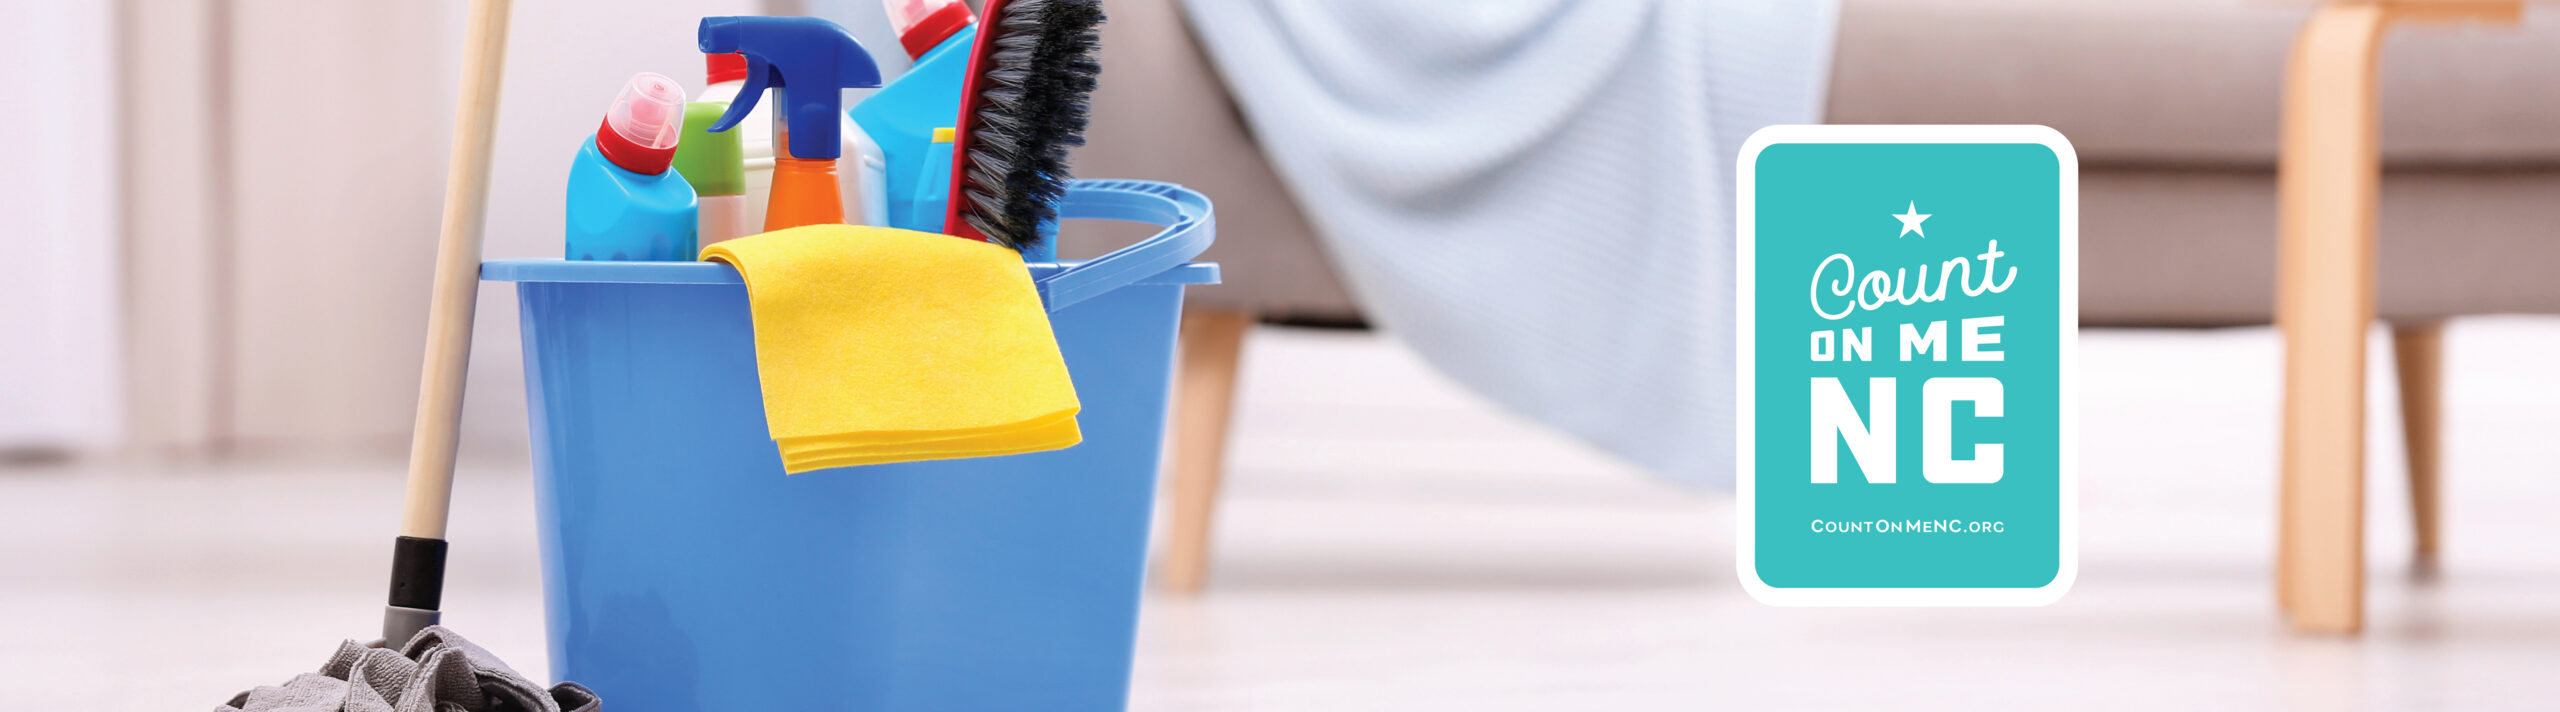 Cleaning procedures and safety protocols for vacation rentals